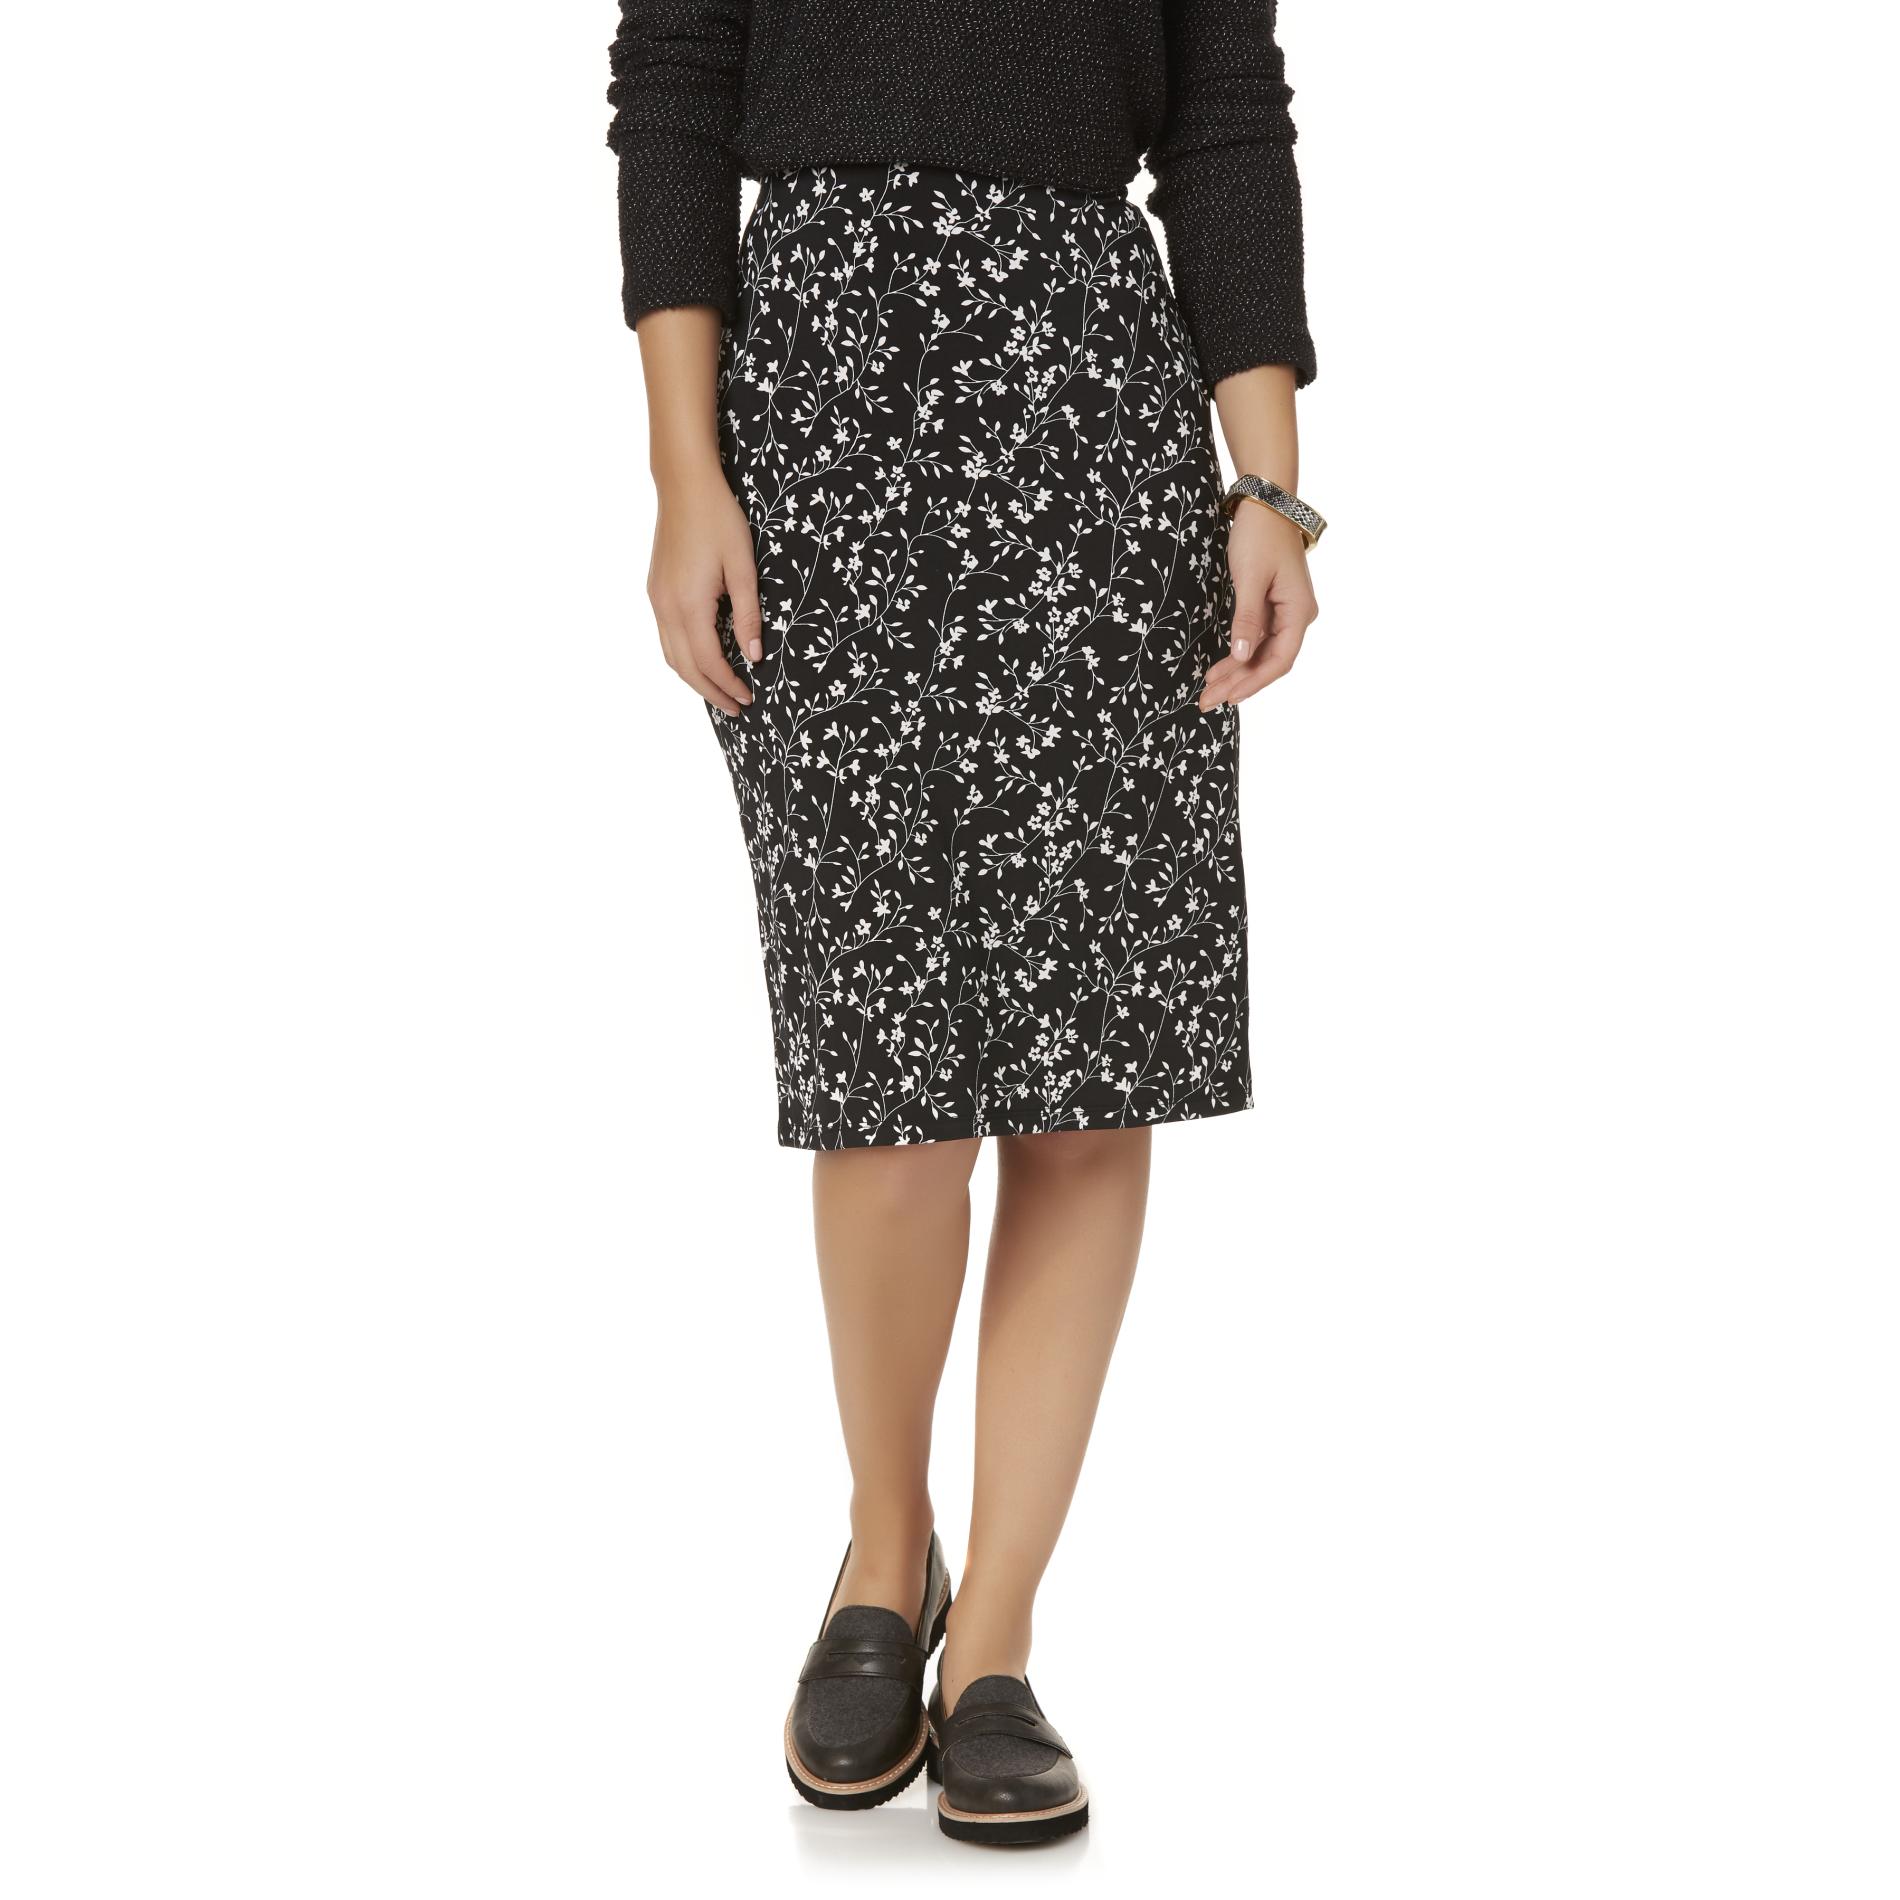 Simply Styled Women's Knit Skirt - Floral